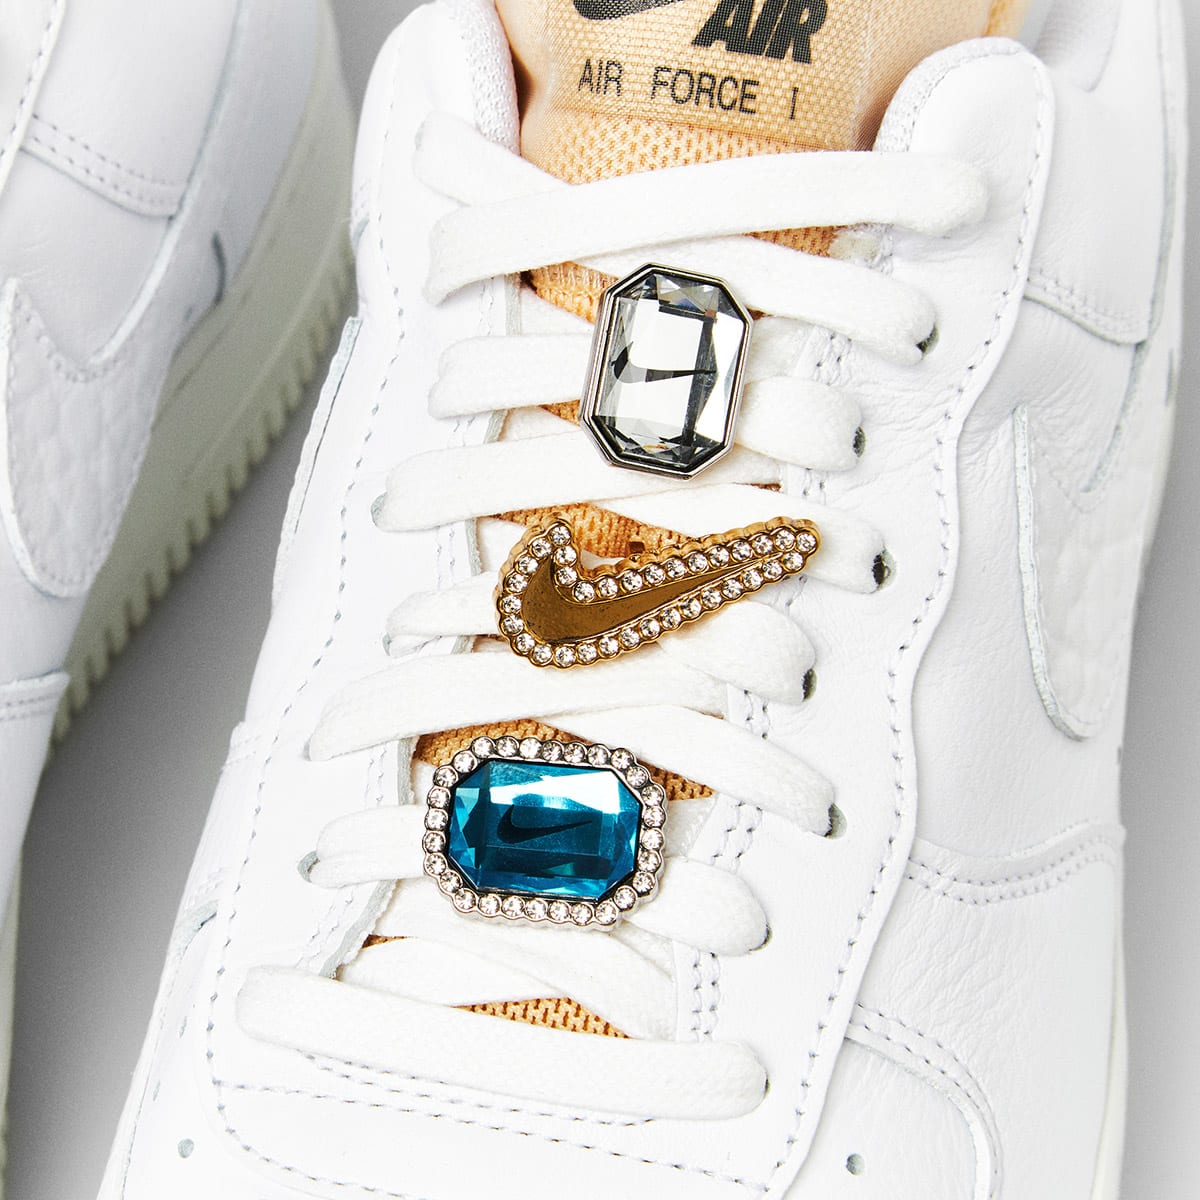 Nike Air Force 1 07 LX W (White, Glacier Ice & Platinum) | END. Launches